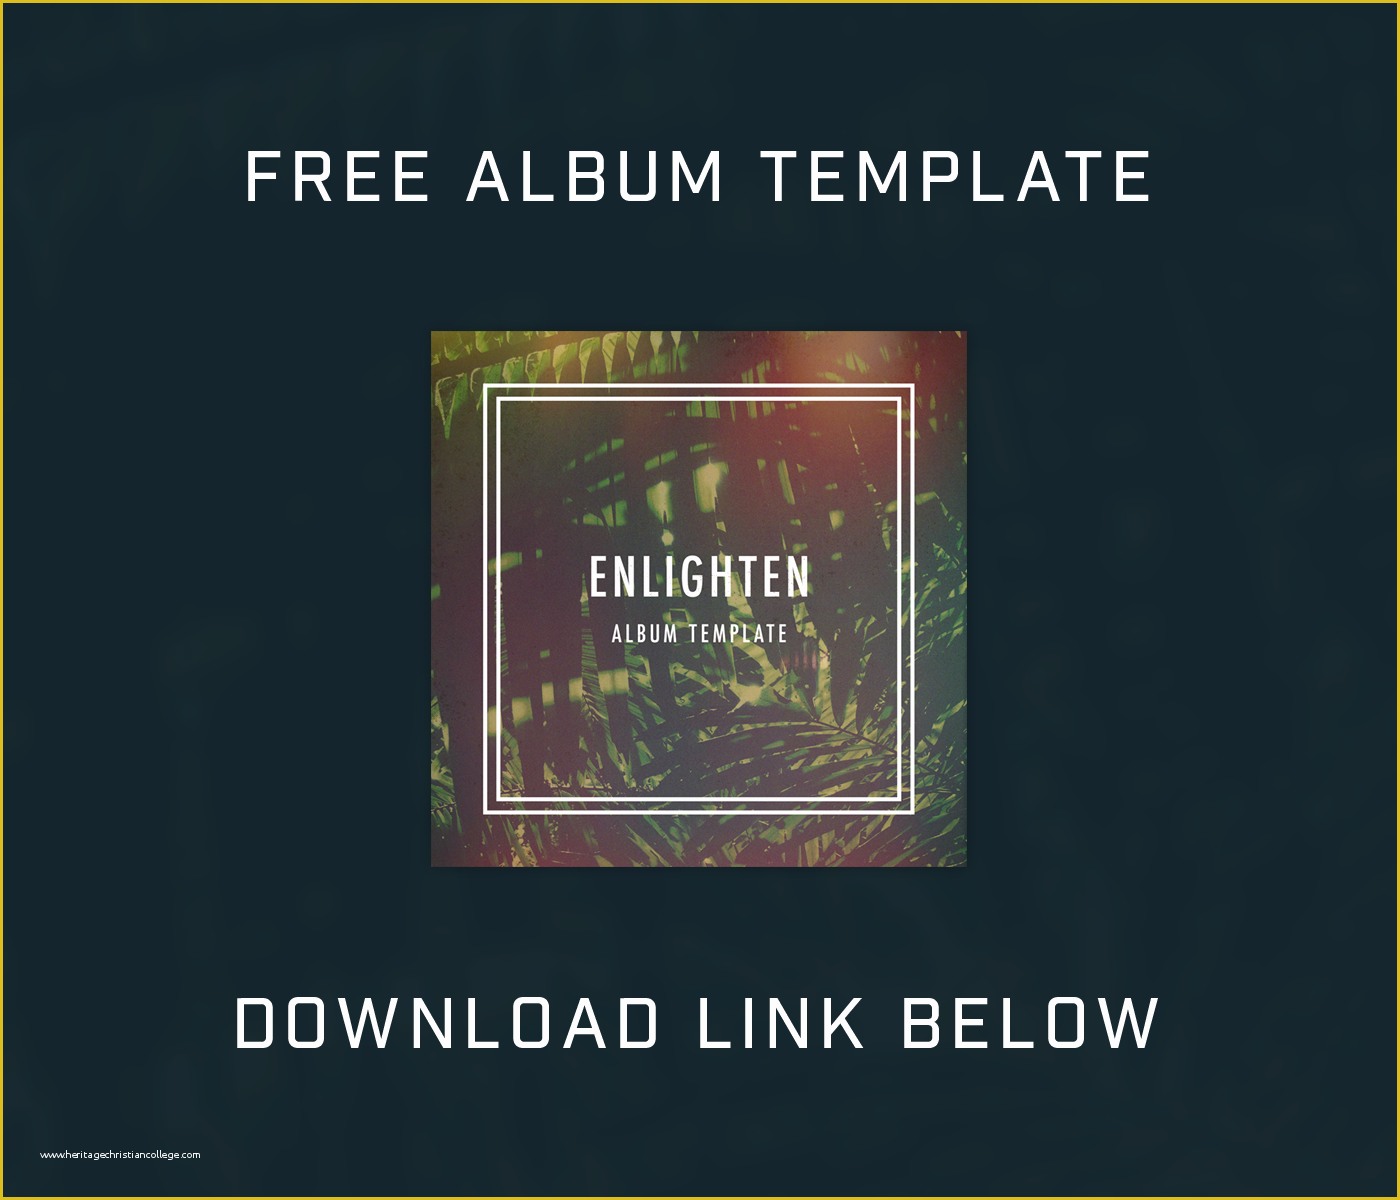 Cd Cover Template Photoshop Free Download Of Free Shop Album Cover Template • Download now